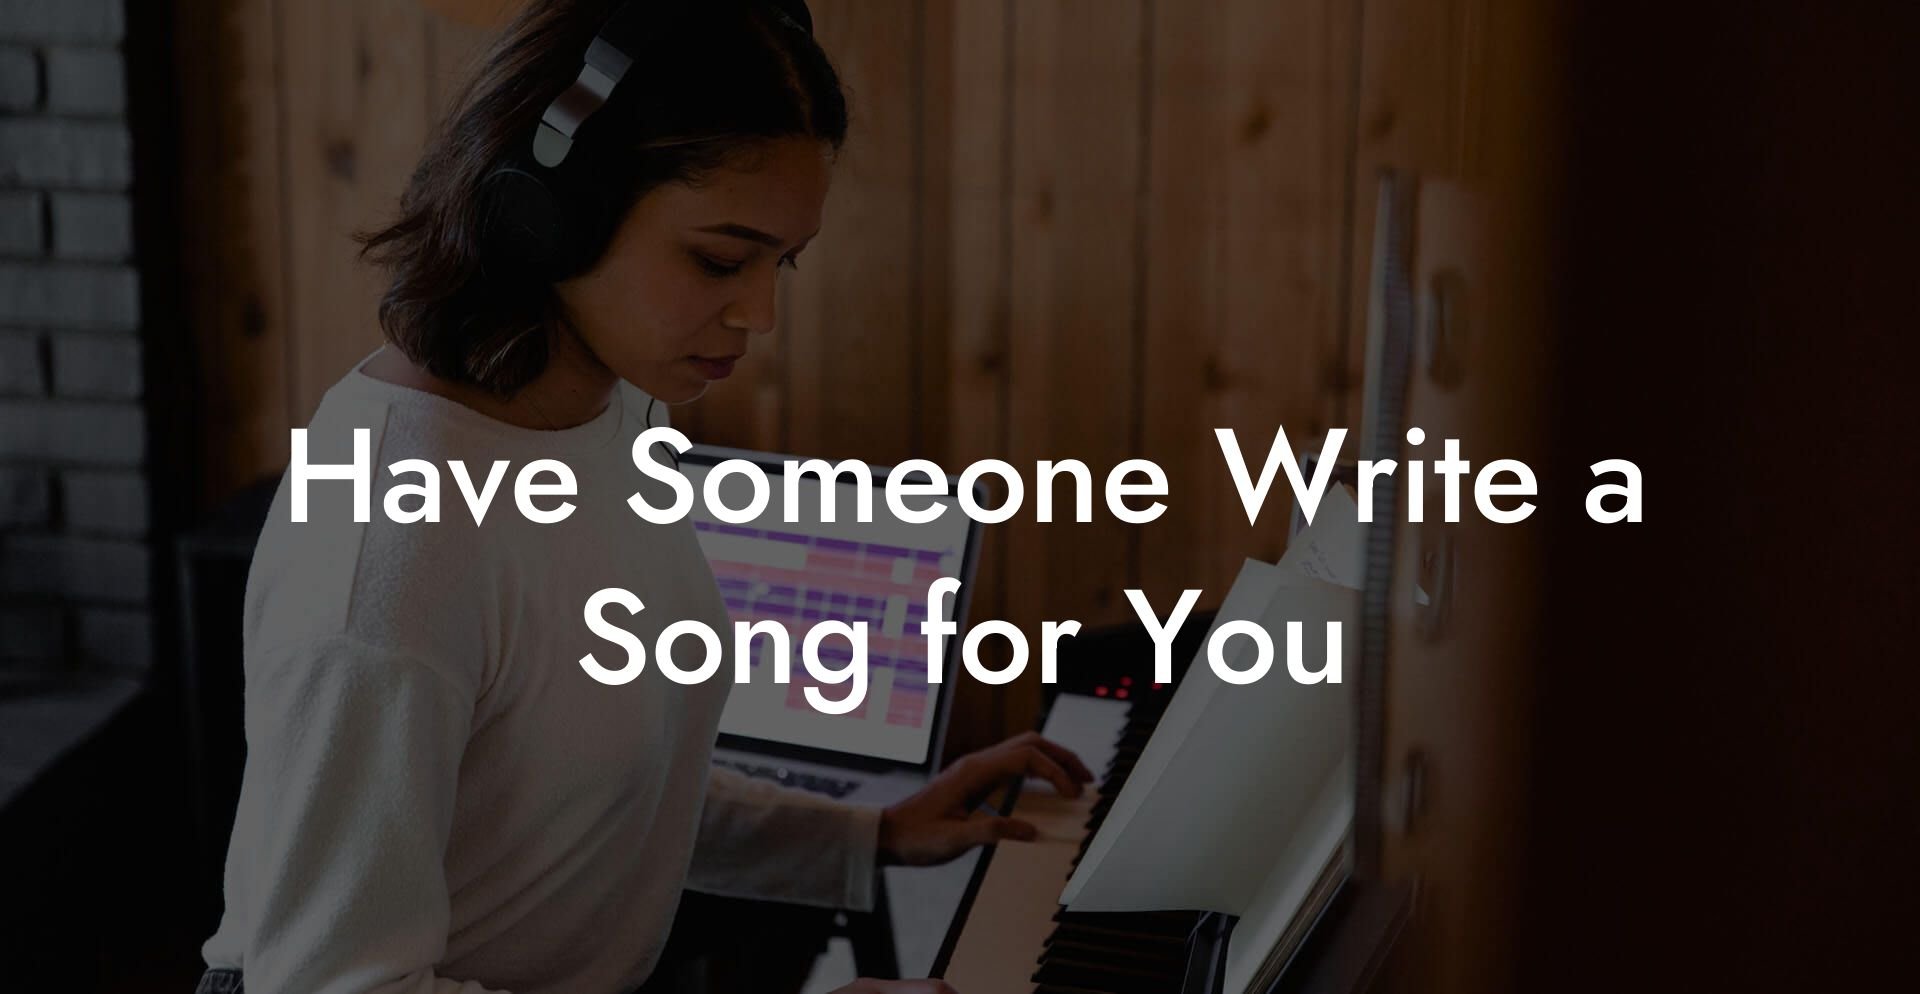 have someone write a song for you lyric assistant